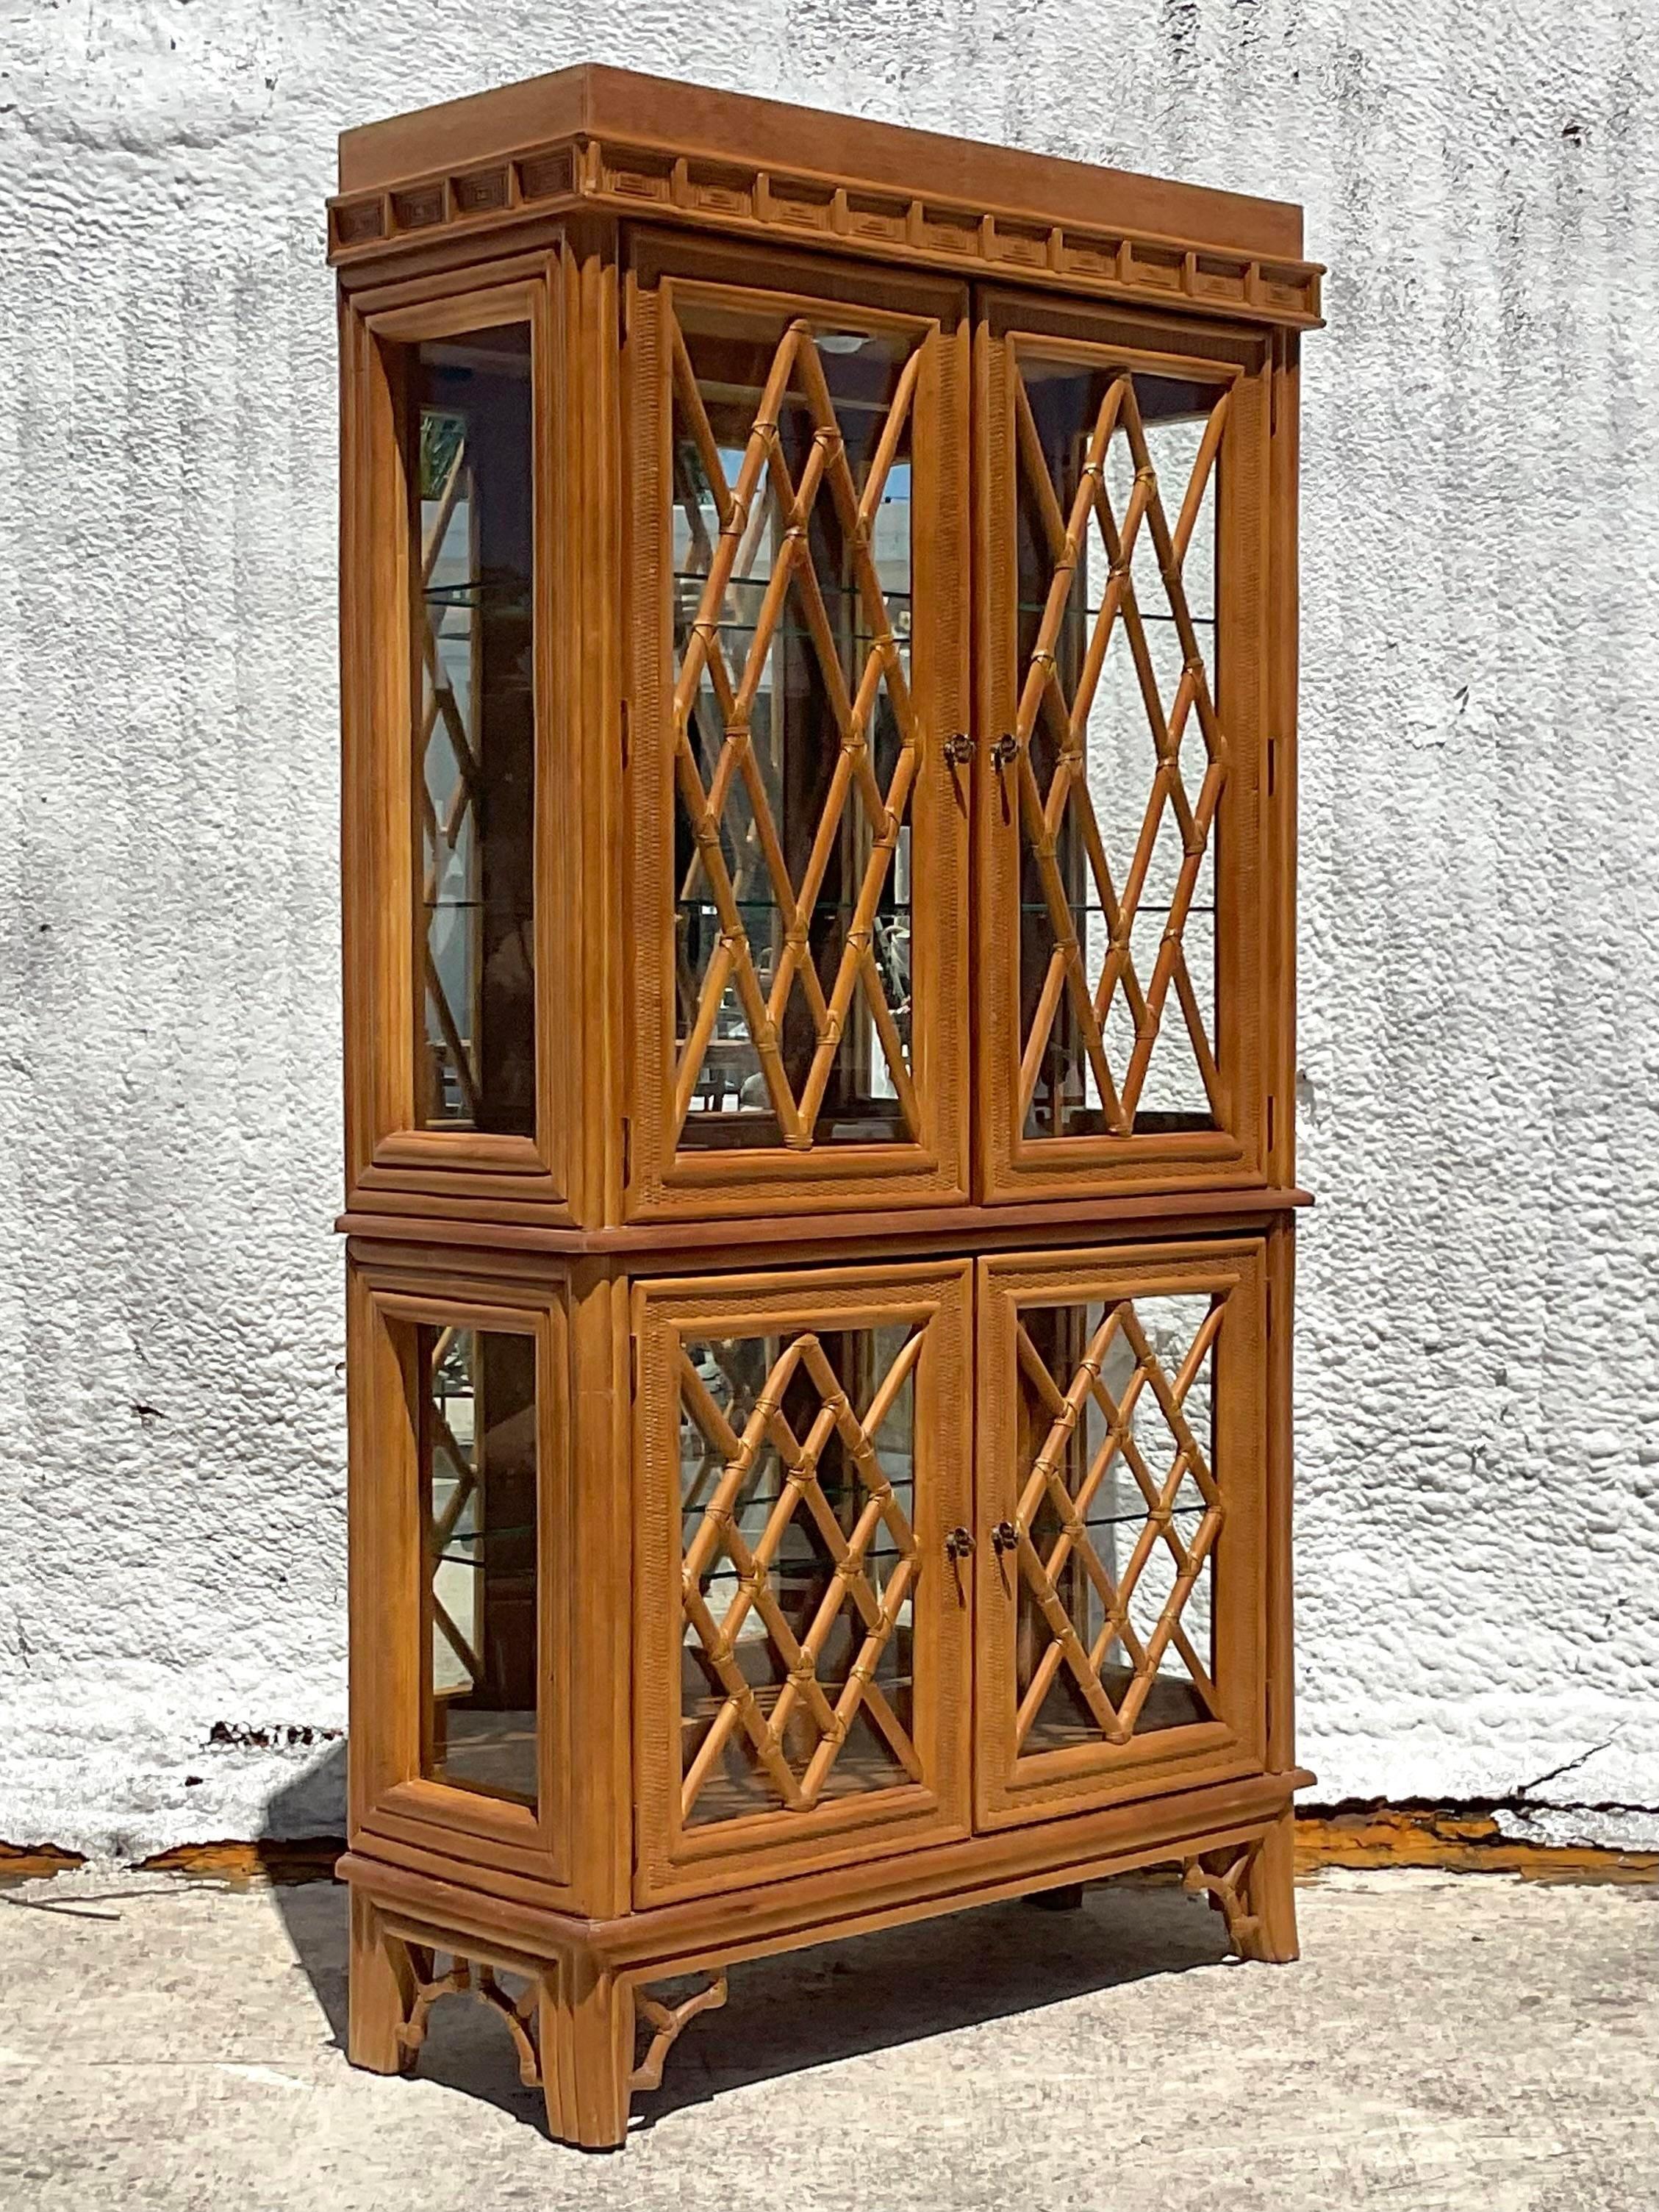 A fabulous vintage Coastal display cabinet. A chic Chinese Chippendale design in the mullions. Inset glass shelves, interior lights and mirrored back walls. Acquired from a Palm Beach estate.